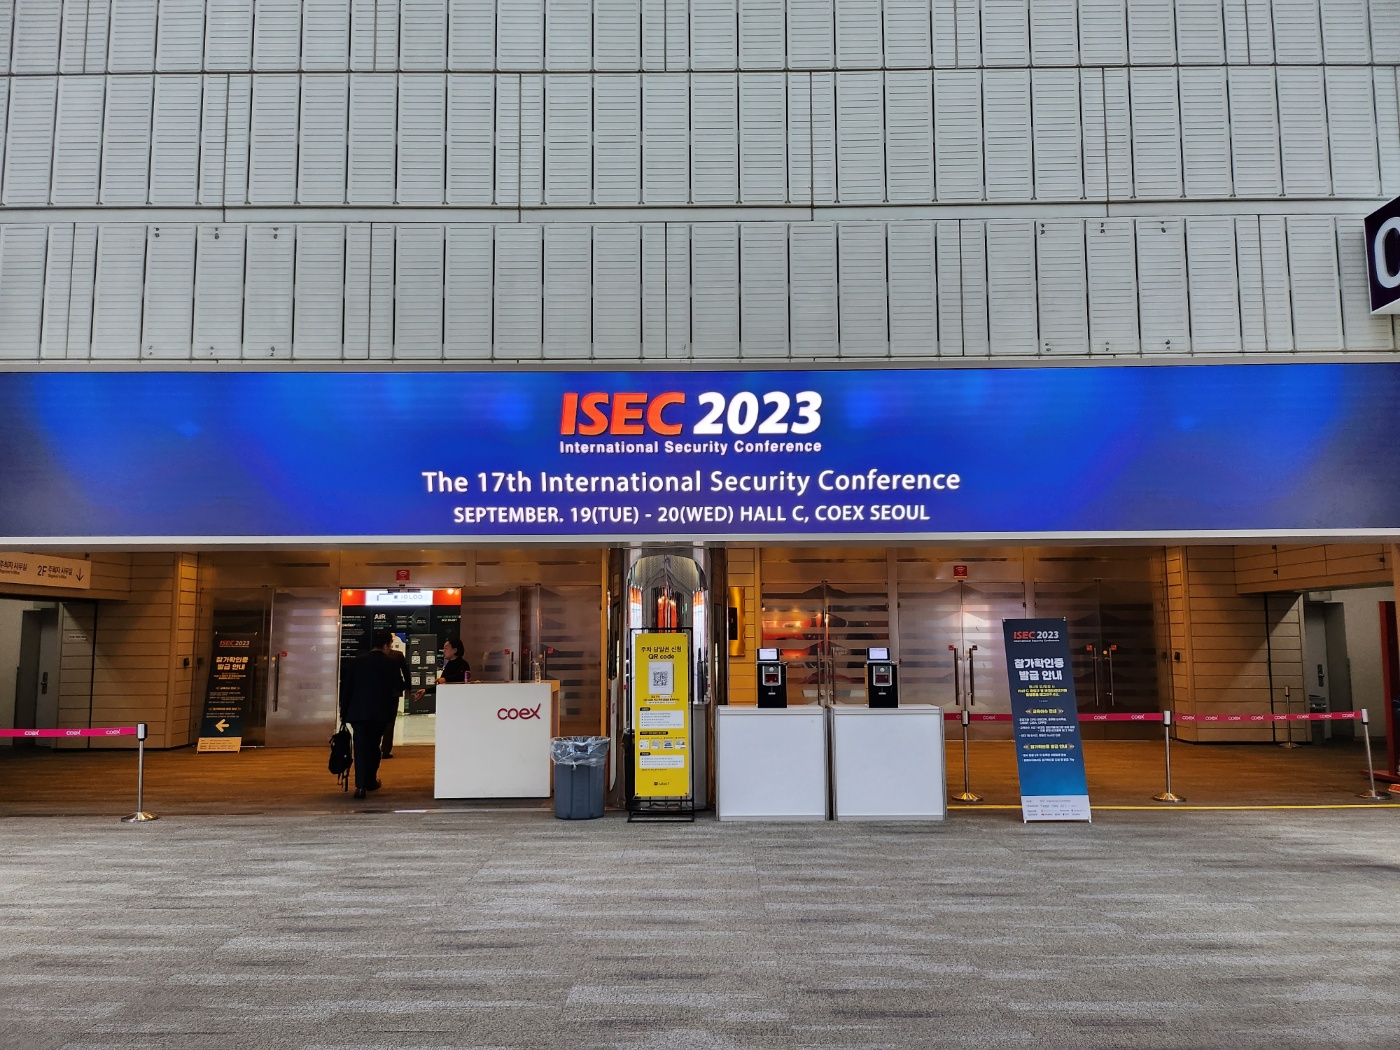 Cloudbric joined Internationl Security Conference, ISEC, COEX Hall C